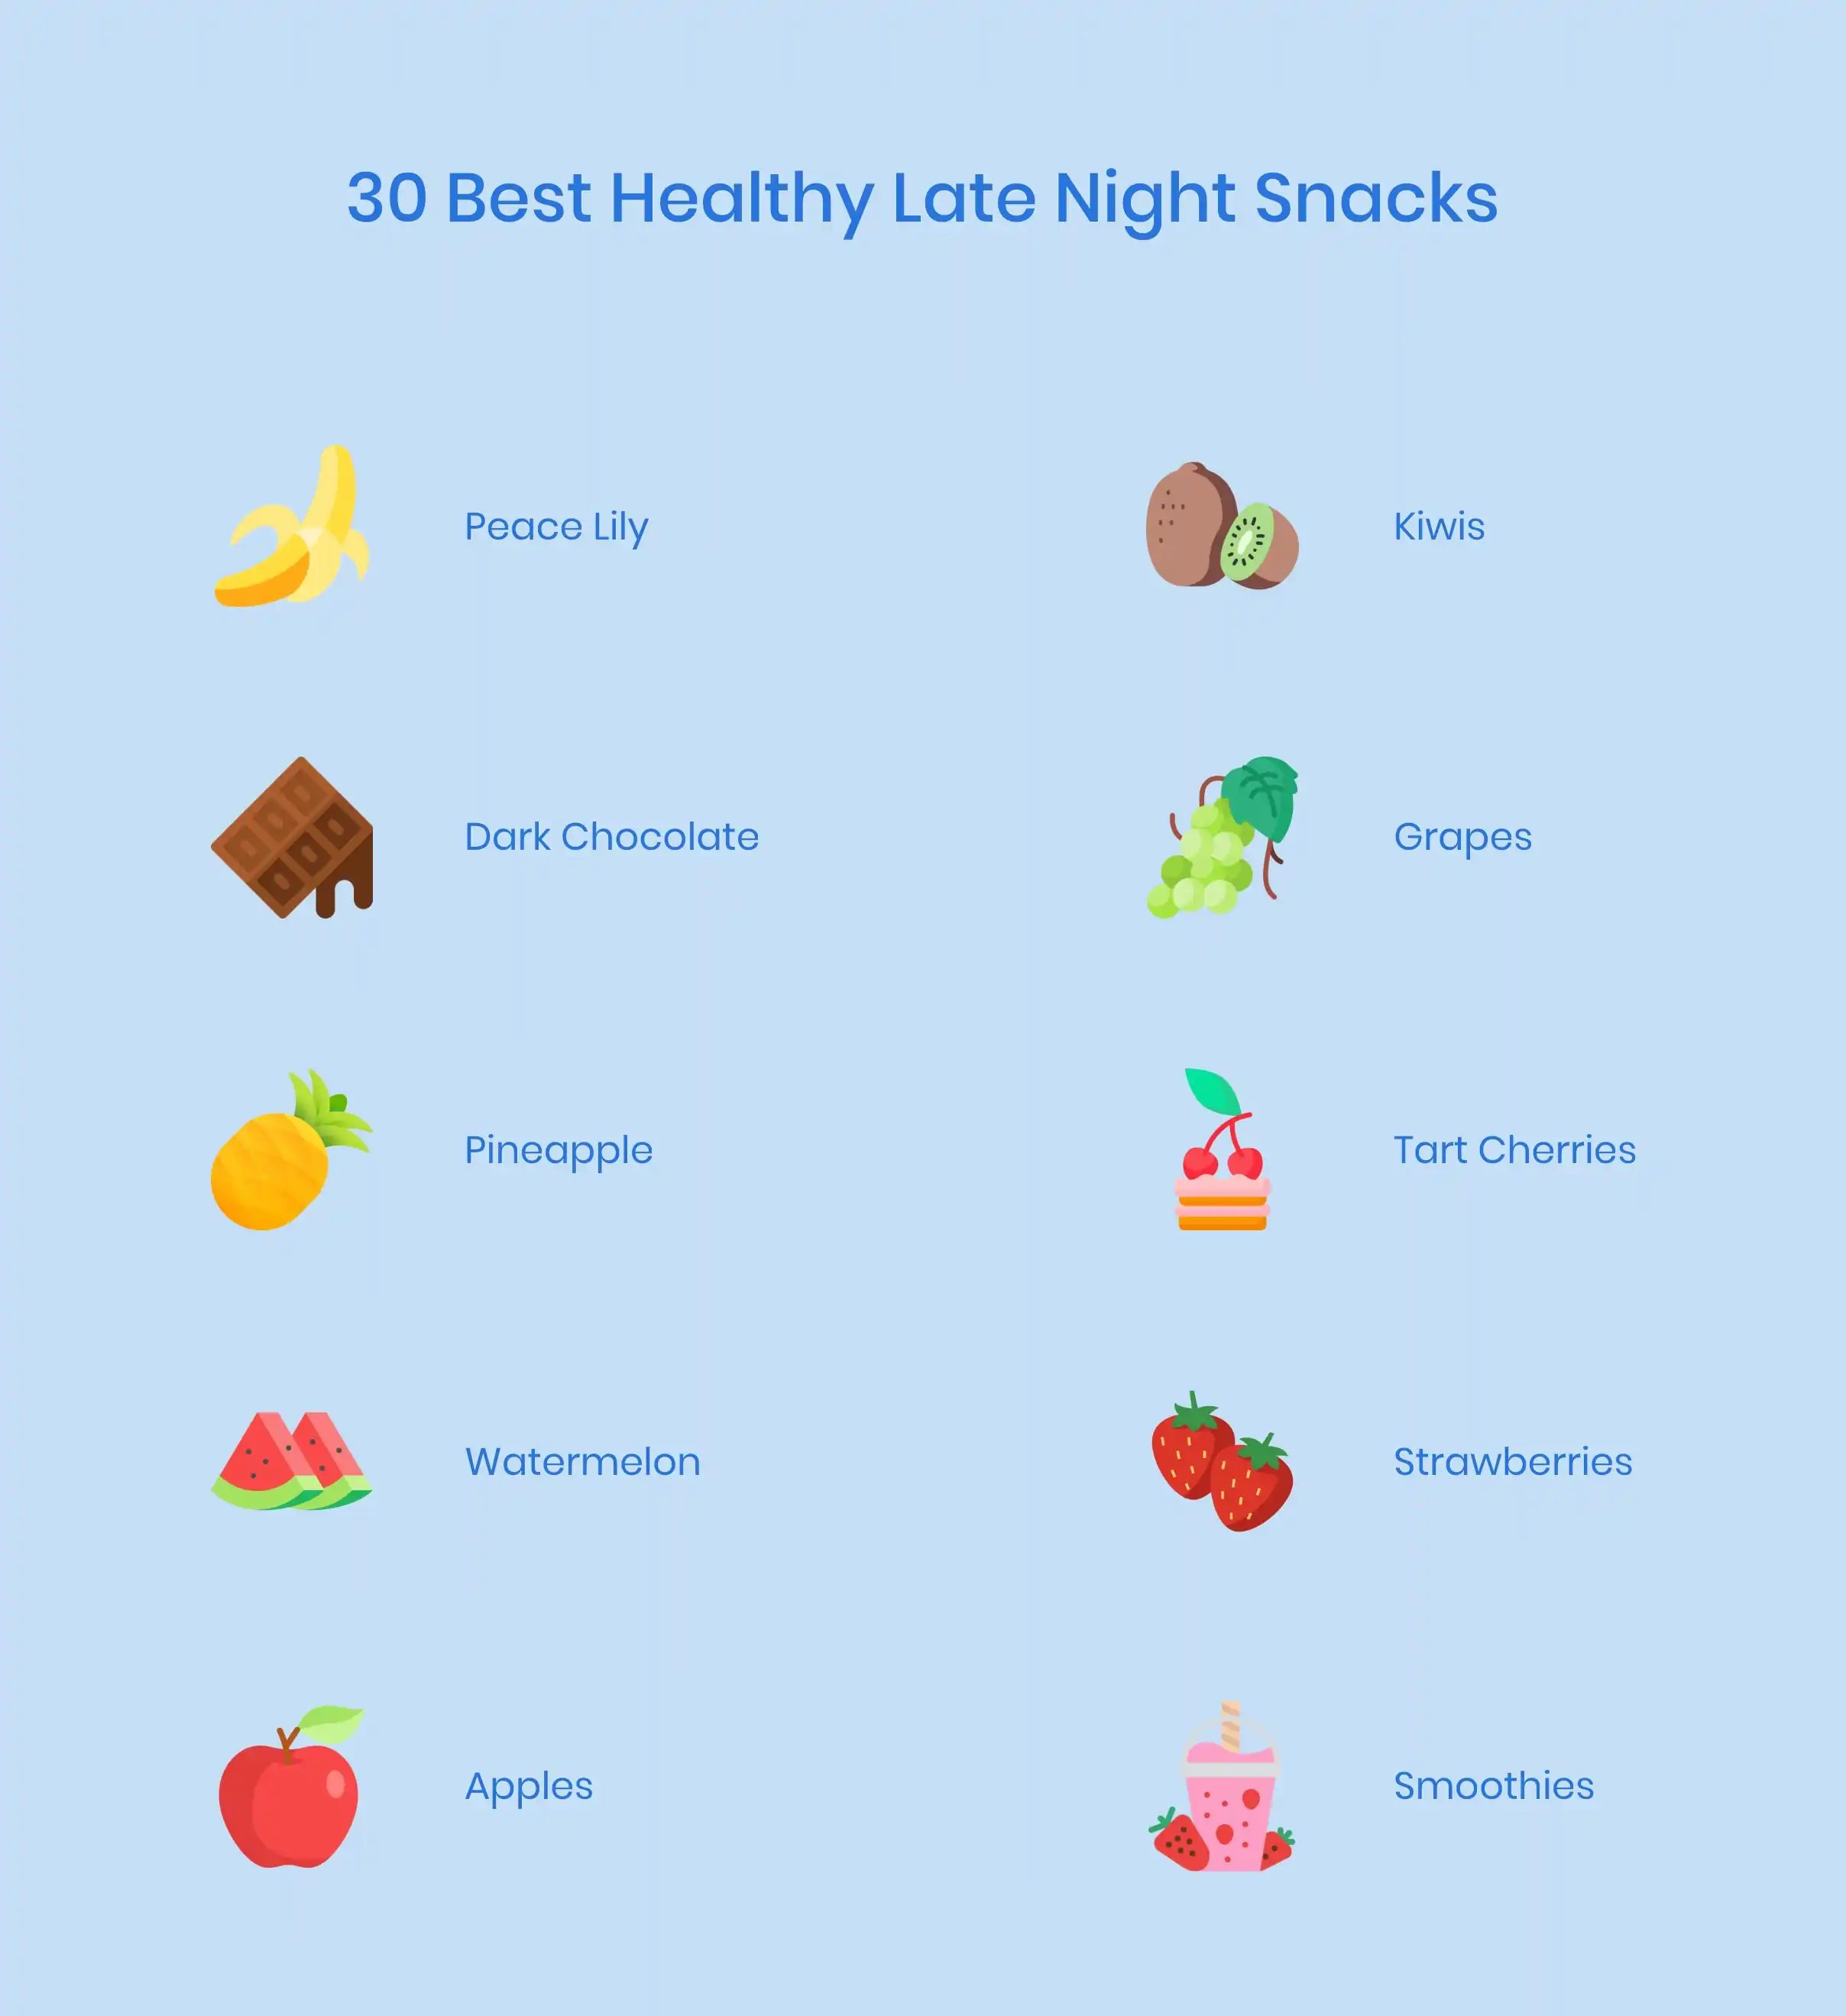 Satisfy late night cravings for good with NightFood bars - Parenting Healthy